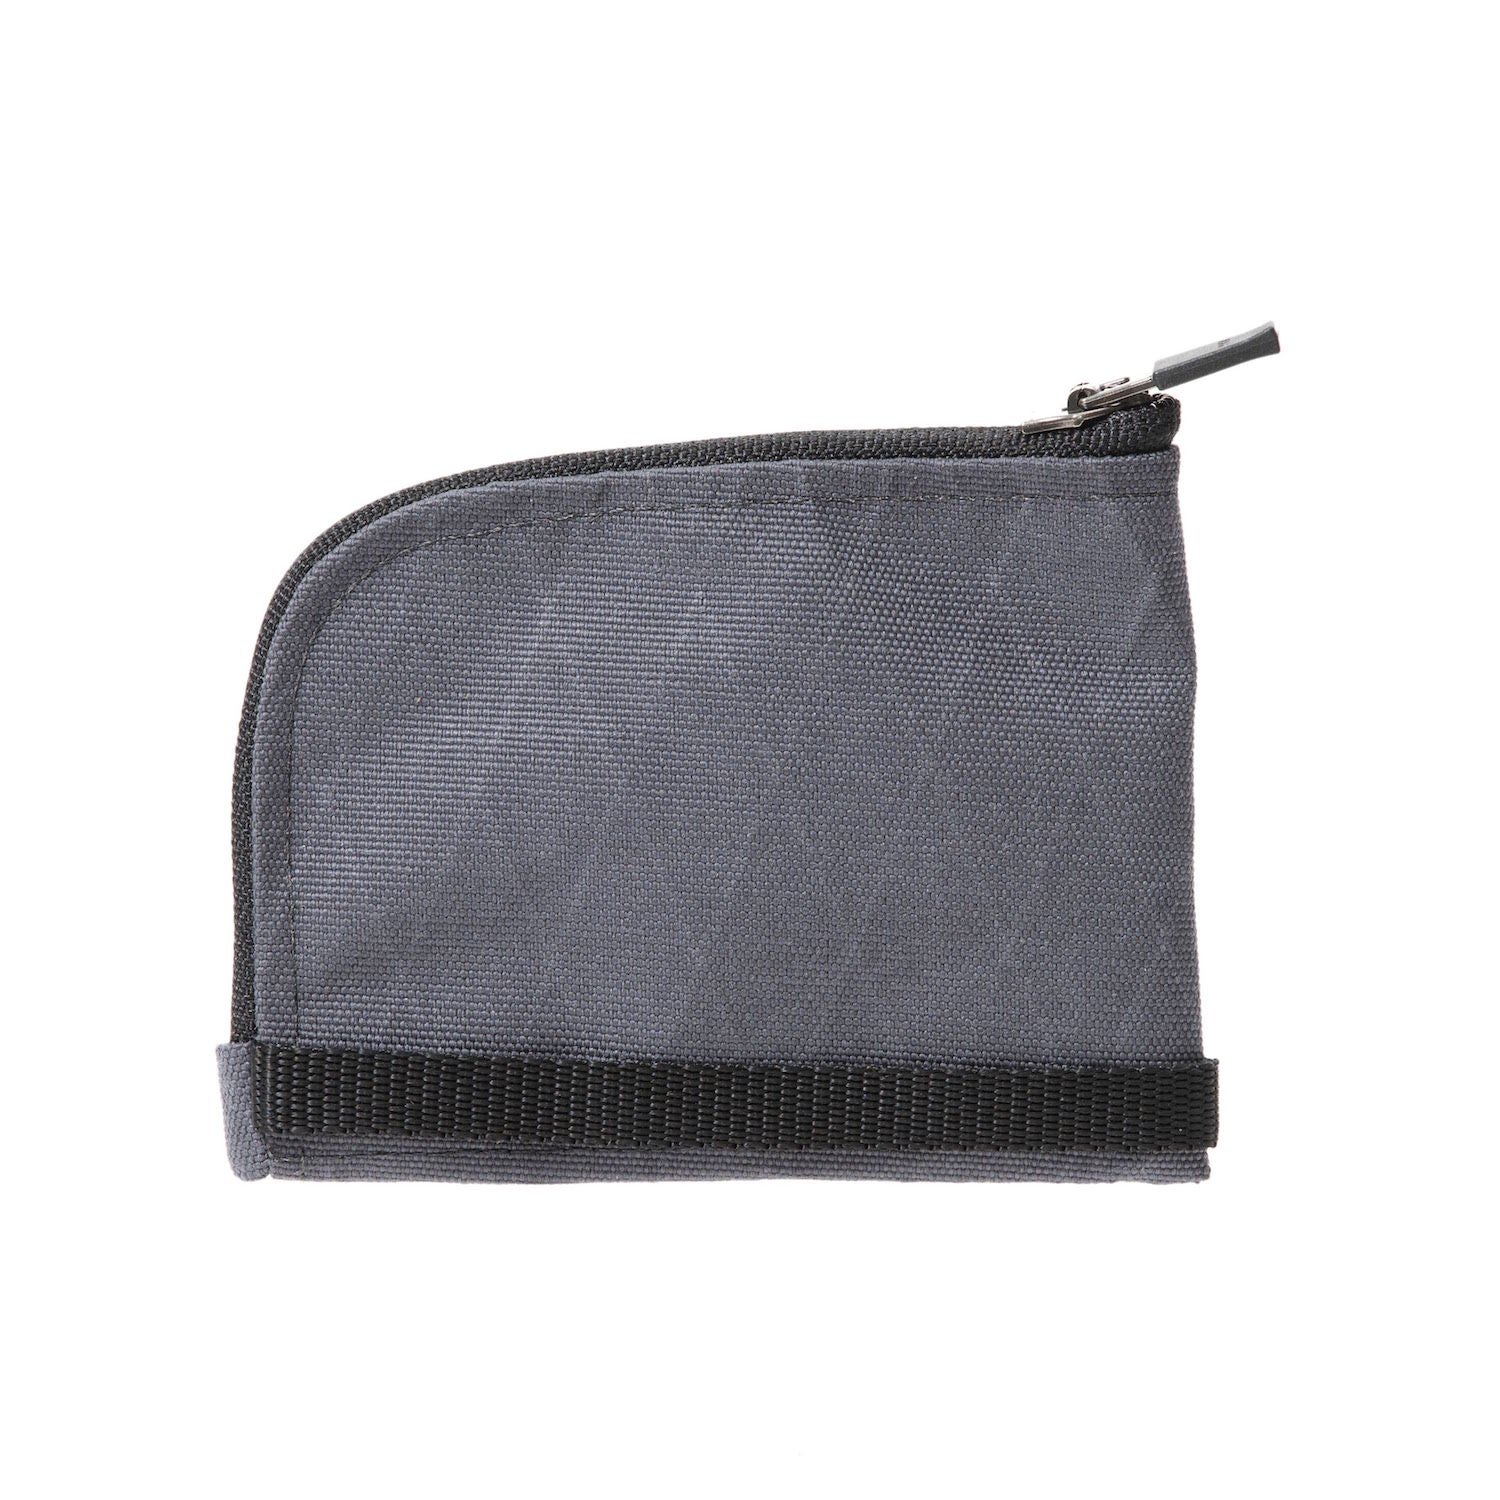 OUTER SHELL ADVENTURE Zip Wallet Compact